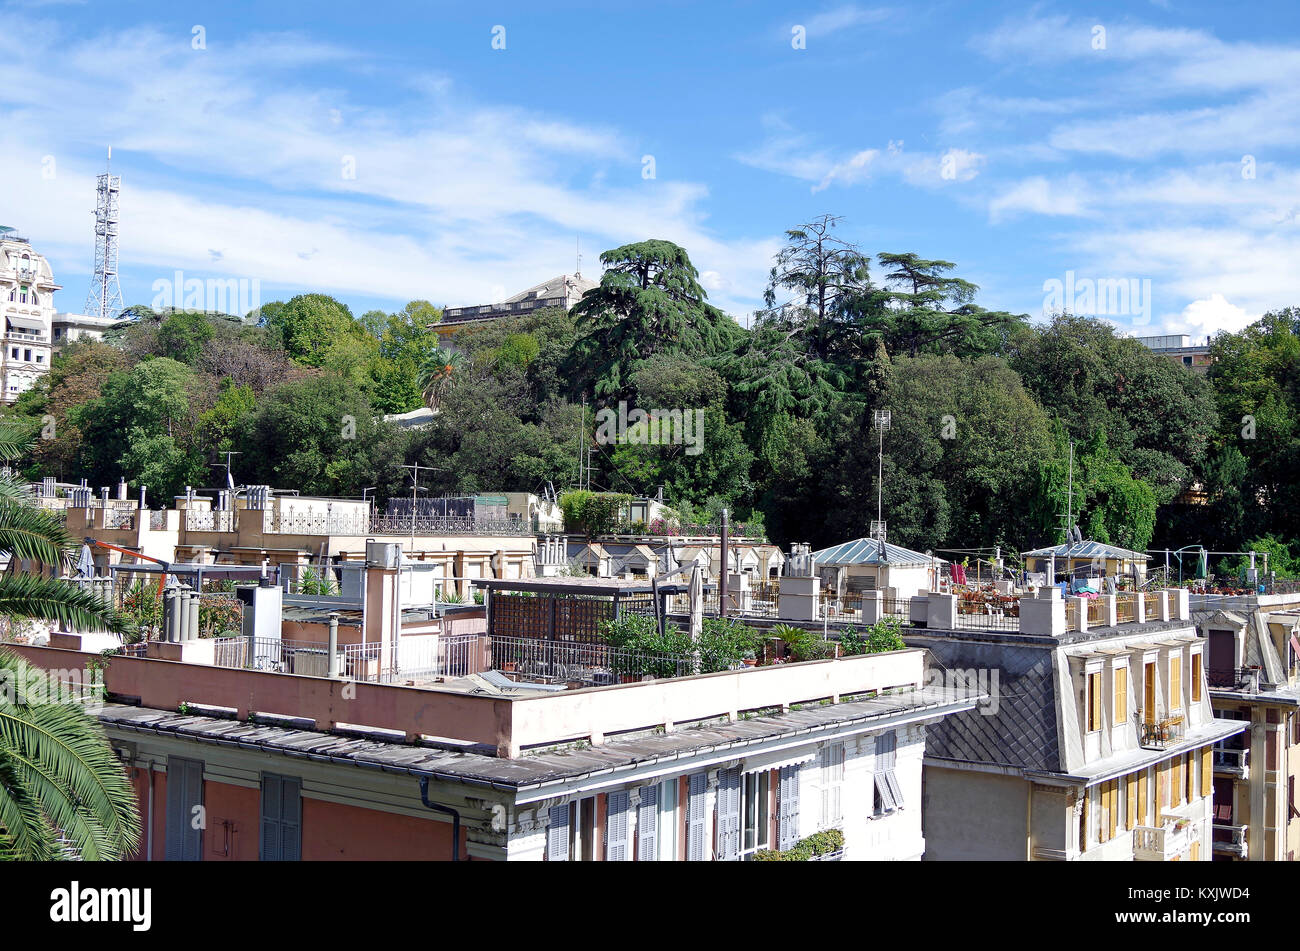 View from street level, of roof gardens of 6 storey apartment buildings, in an adjacent street, in a residential area near the centre of Genoa, Italy Stock Photo